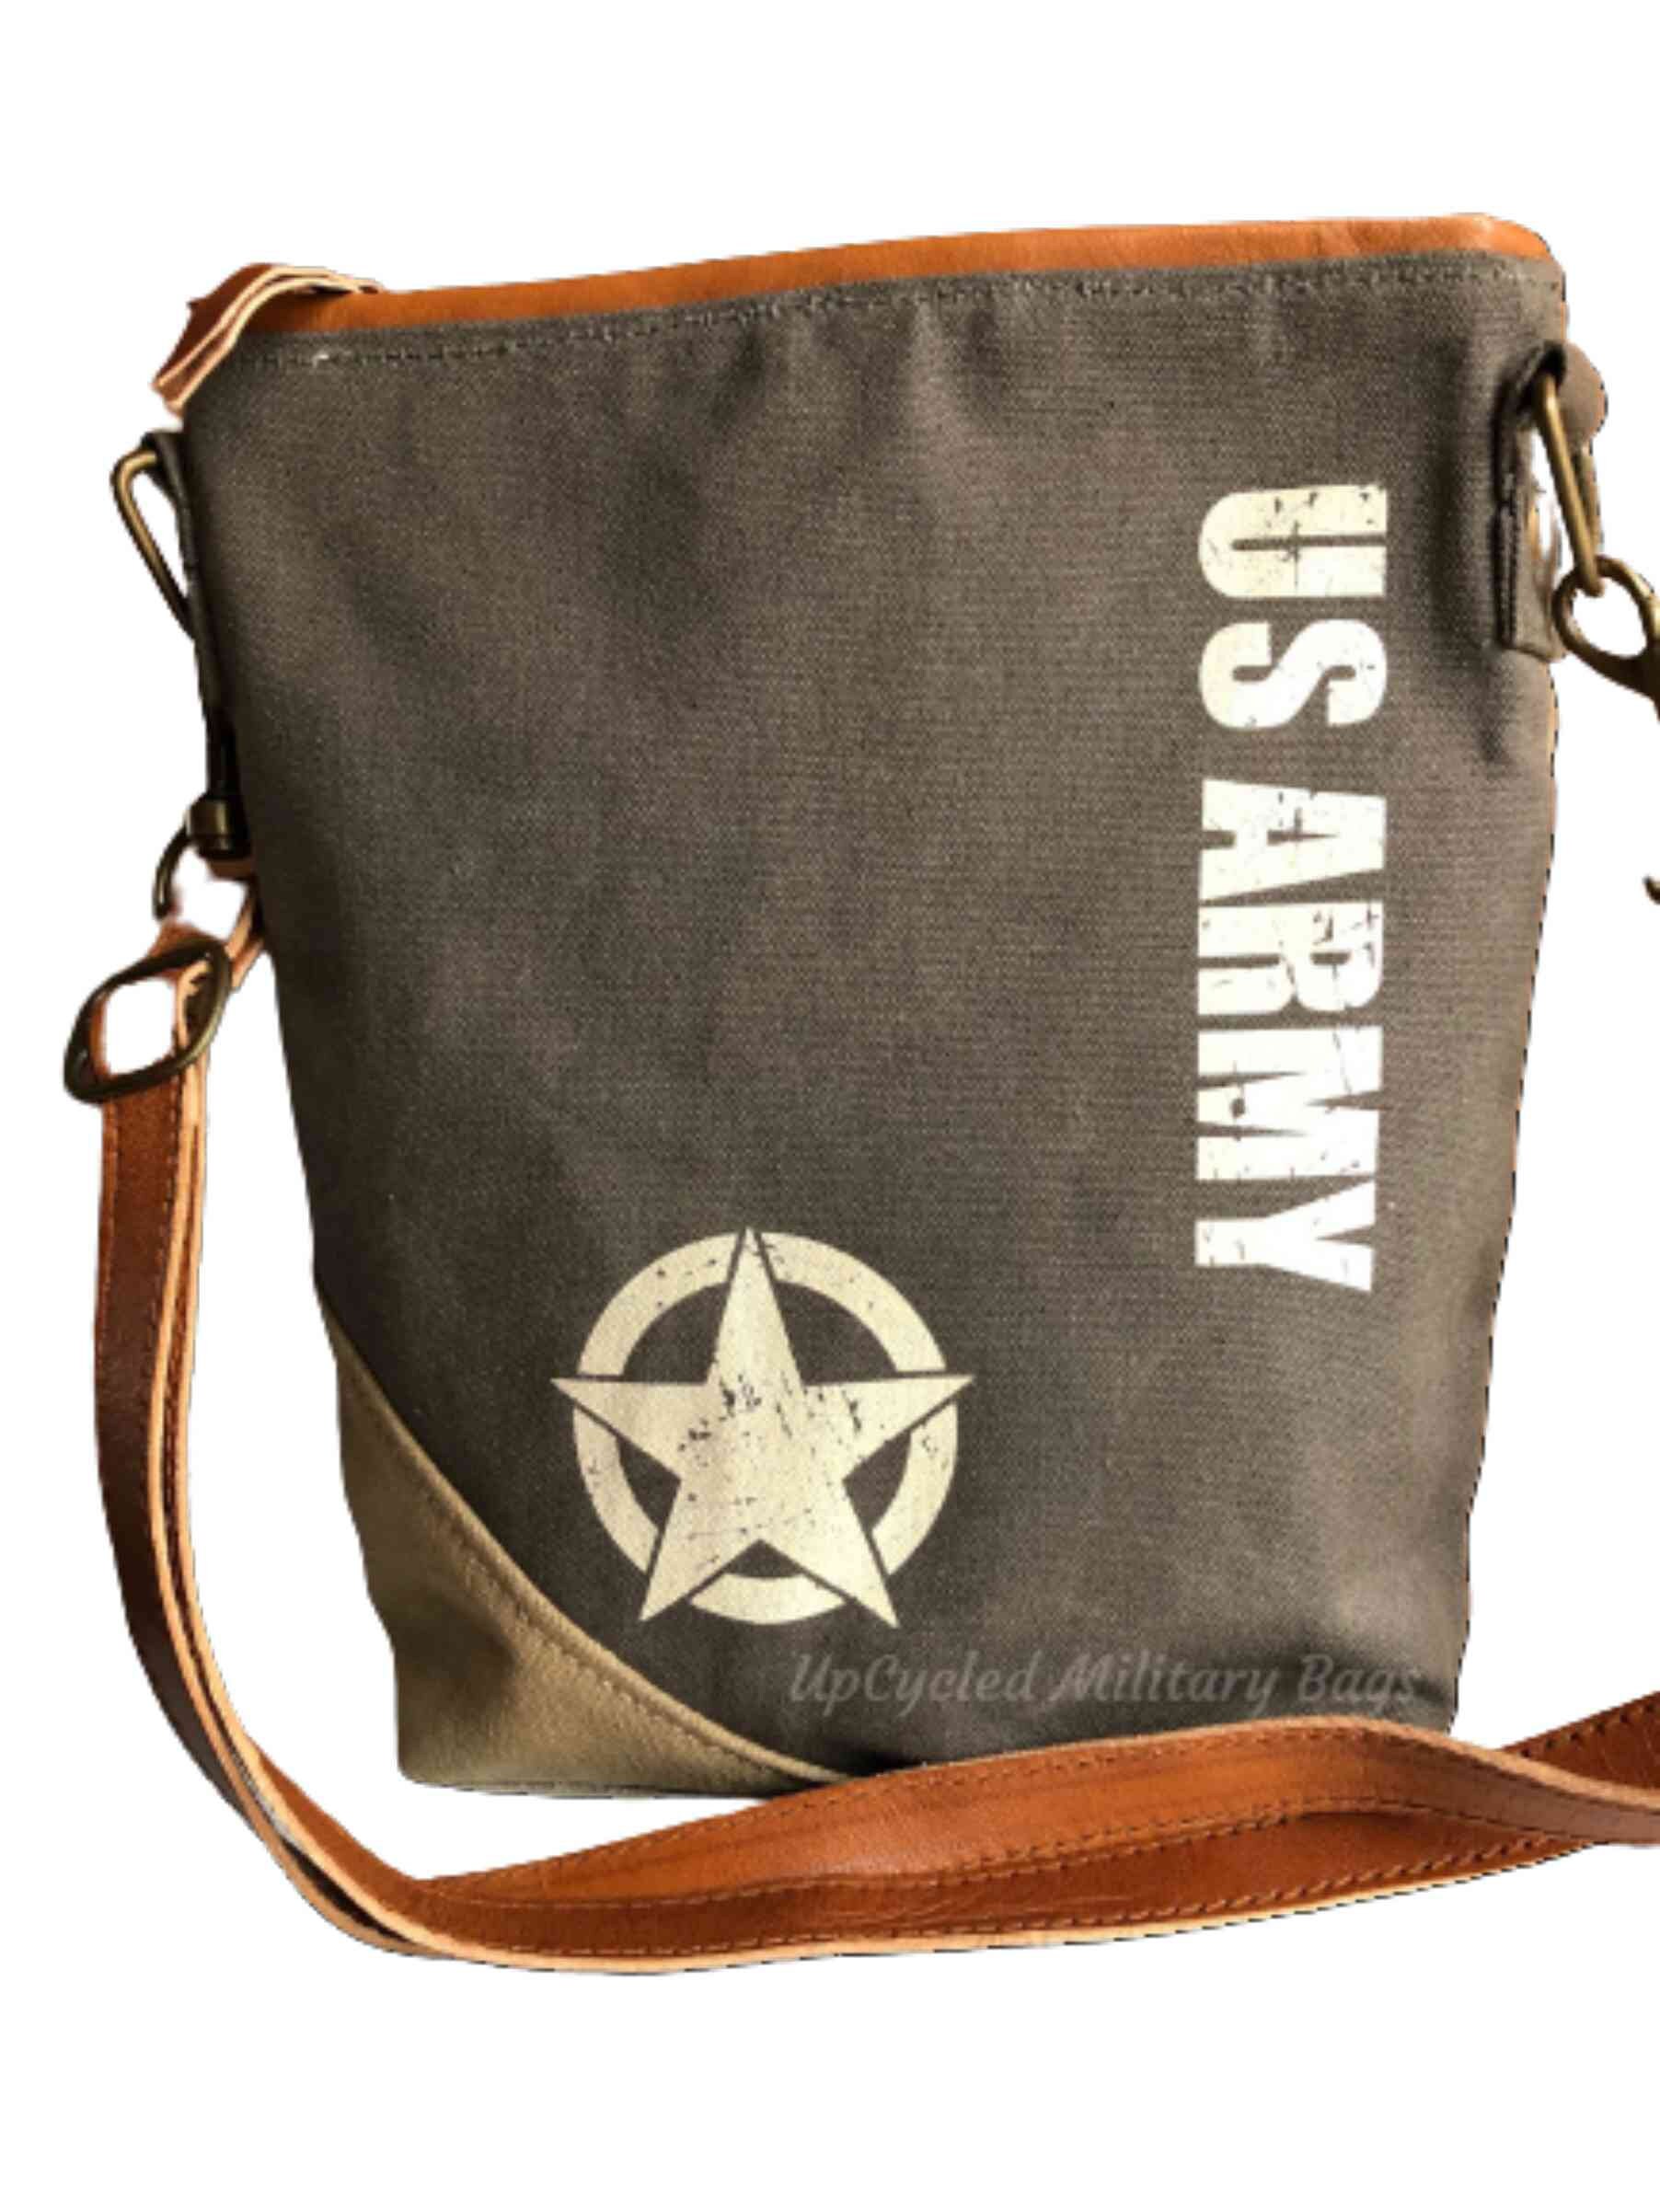 Us Army Repurposed Military Canvas Slim Crossbody Bag Upcycled Wife Army Mom Gift Patriotic Bags Shoulder